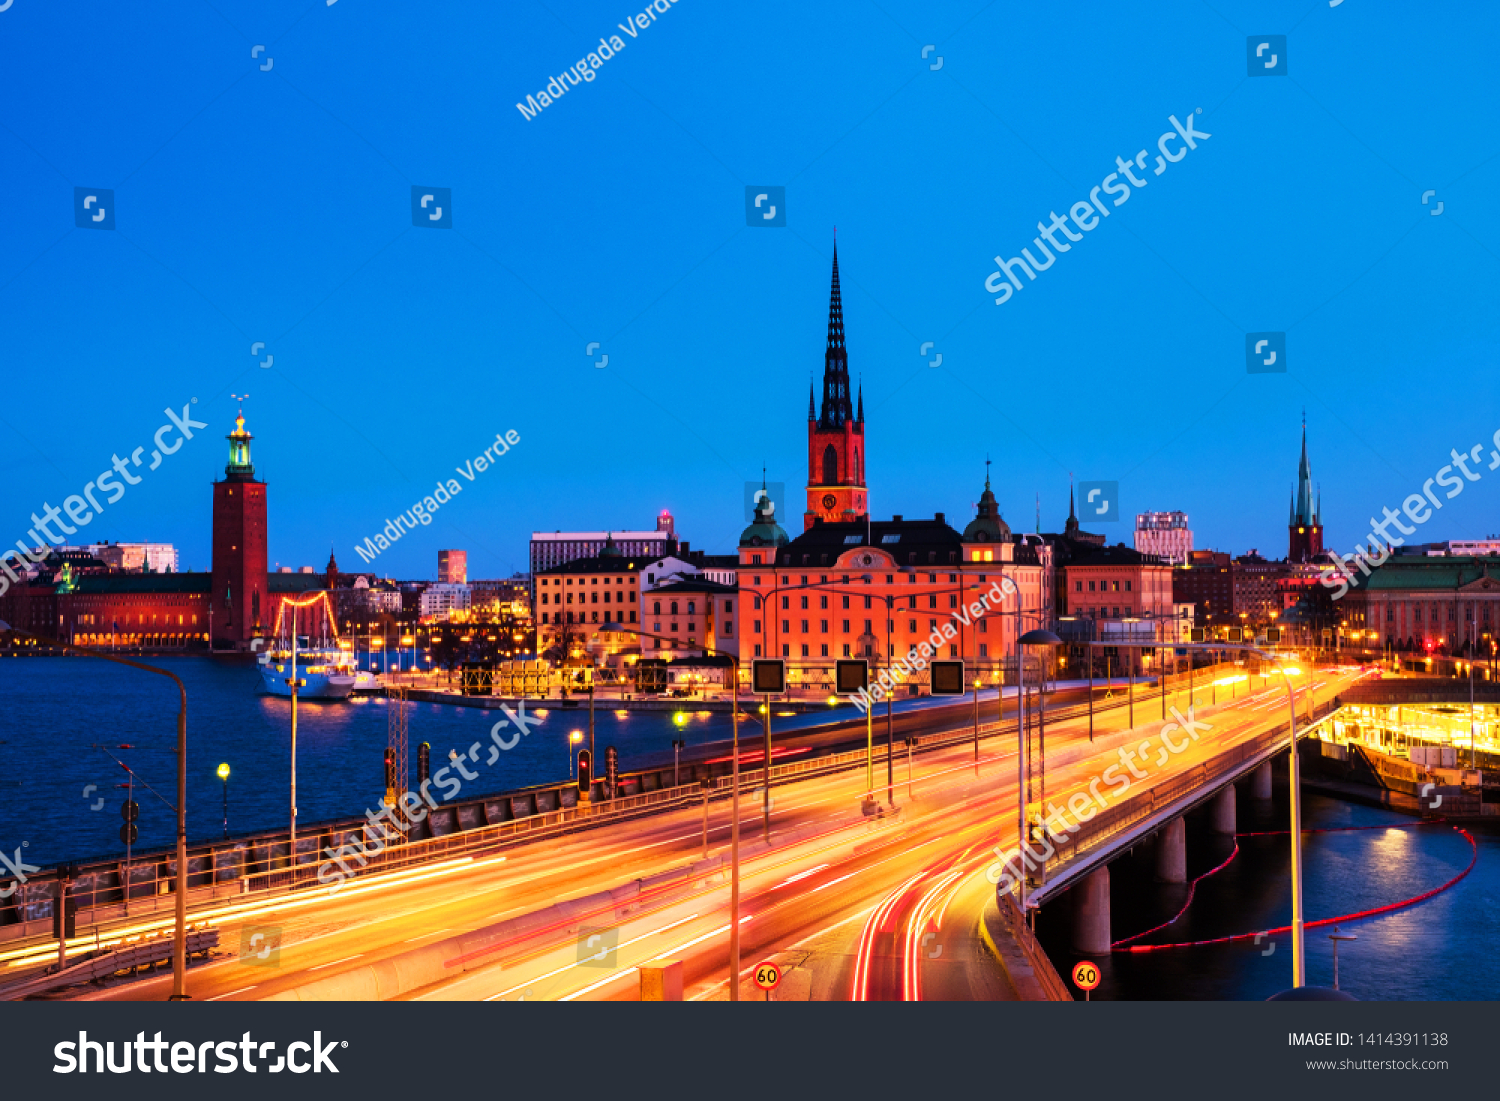 Stockholm, Sweden. View of Gamla Stan in Stockholm, Sweden with landmarks like Riddarholm Church during the night. View of old buildings and car traffic at the bridge #1414391138